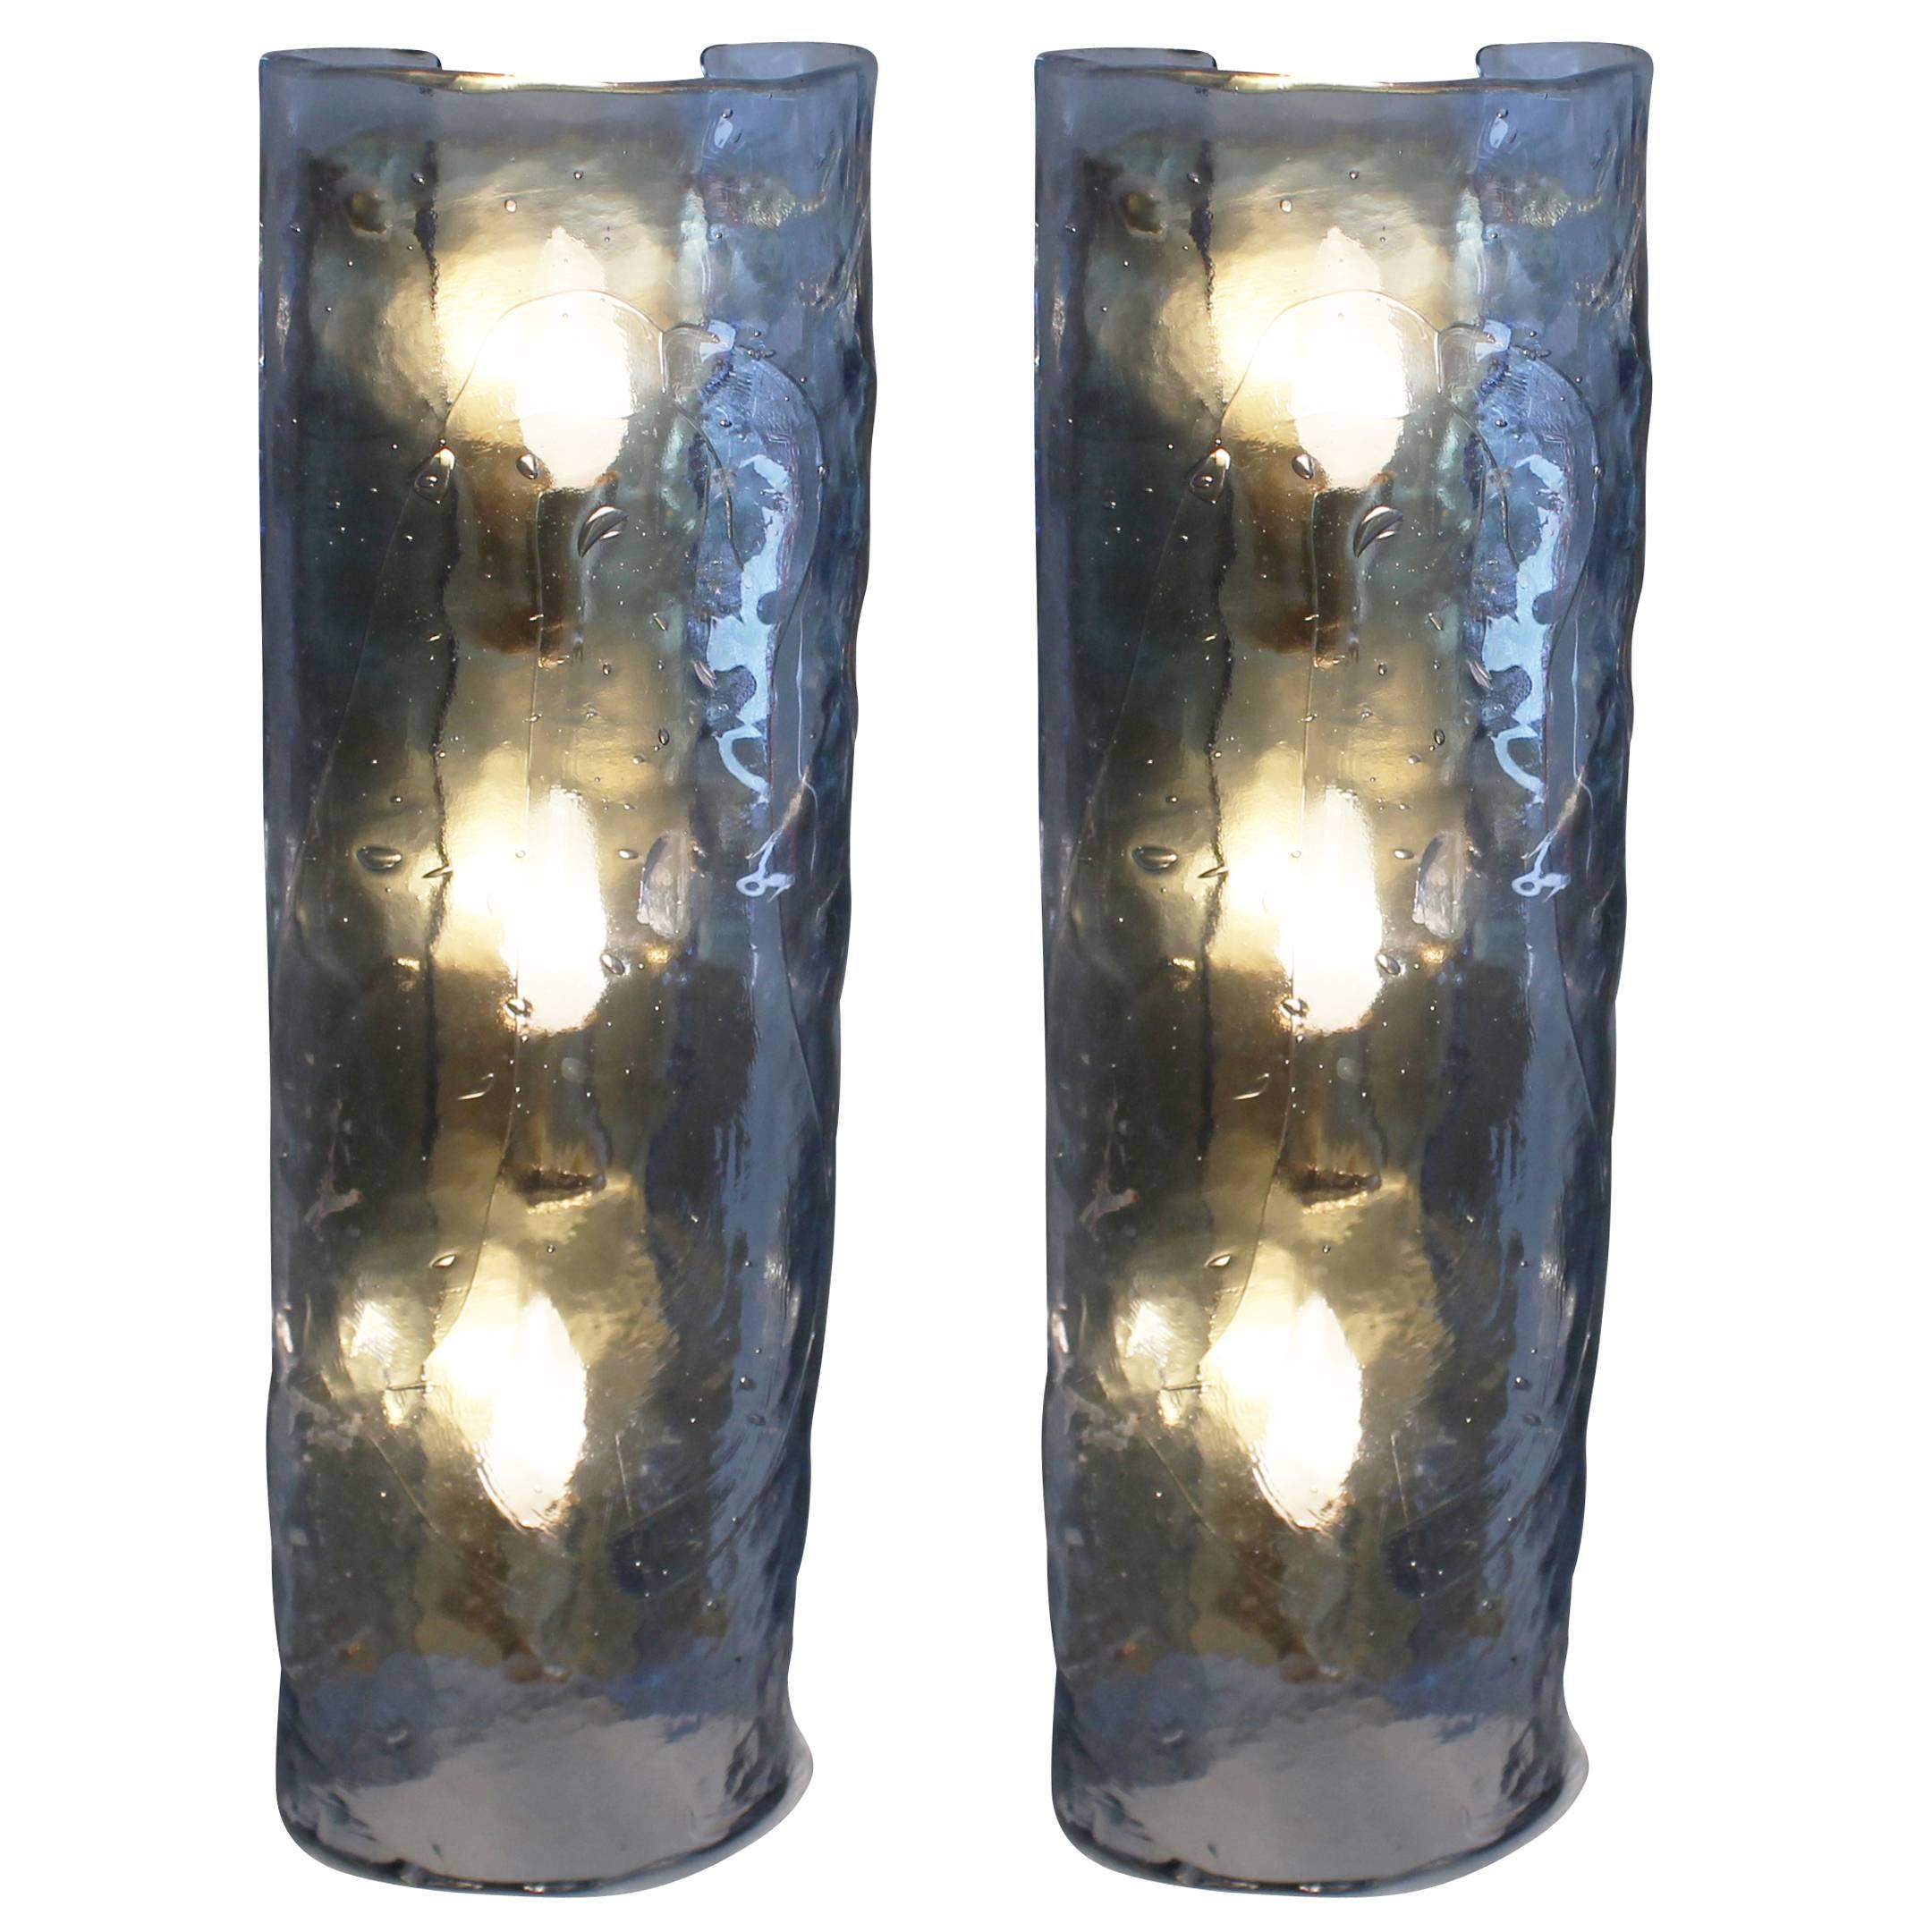 Large Murano glass sconces taken from the University of Catania in Sicily. The glass is textured and has some intentional imperfections and bubbles. The hardware is brass and holds three candelabra sockets. Can also be used as ceiling lights.